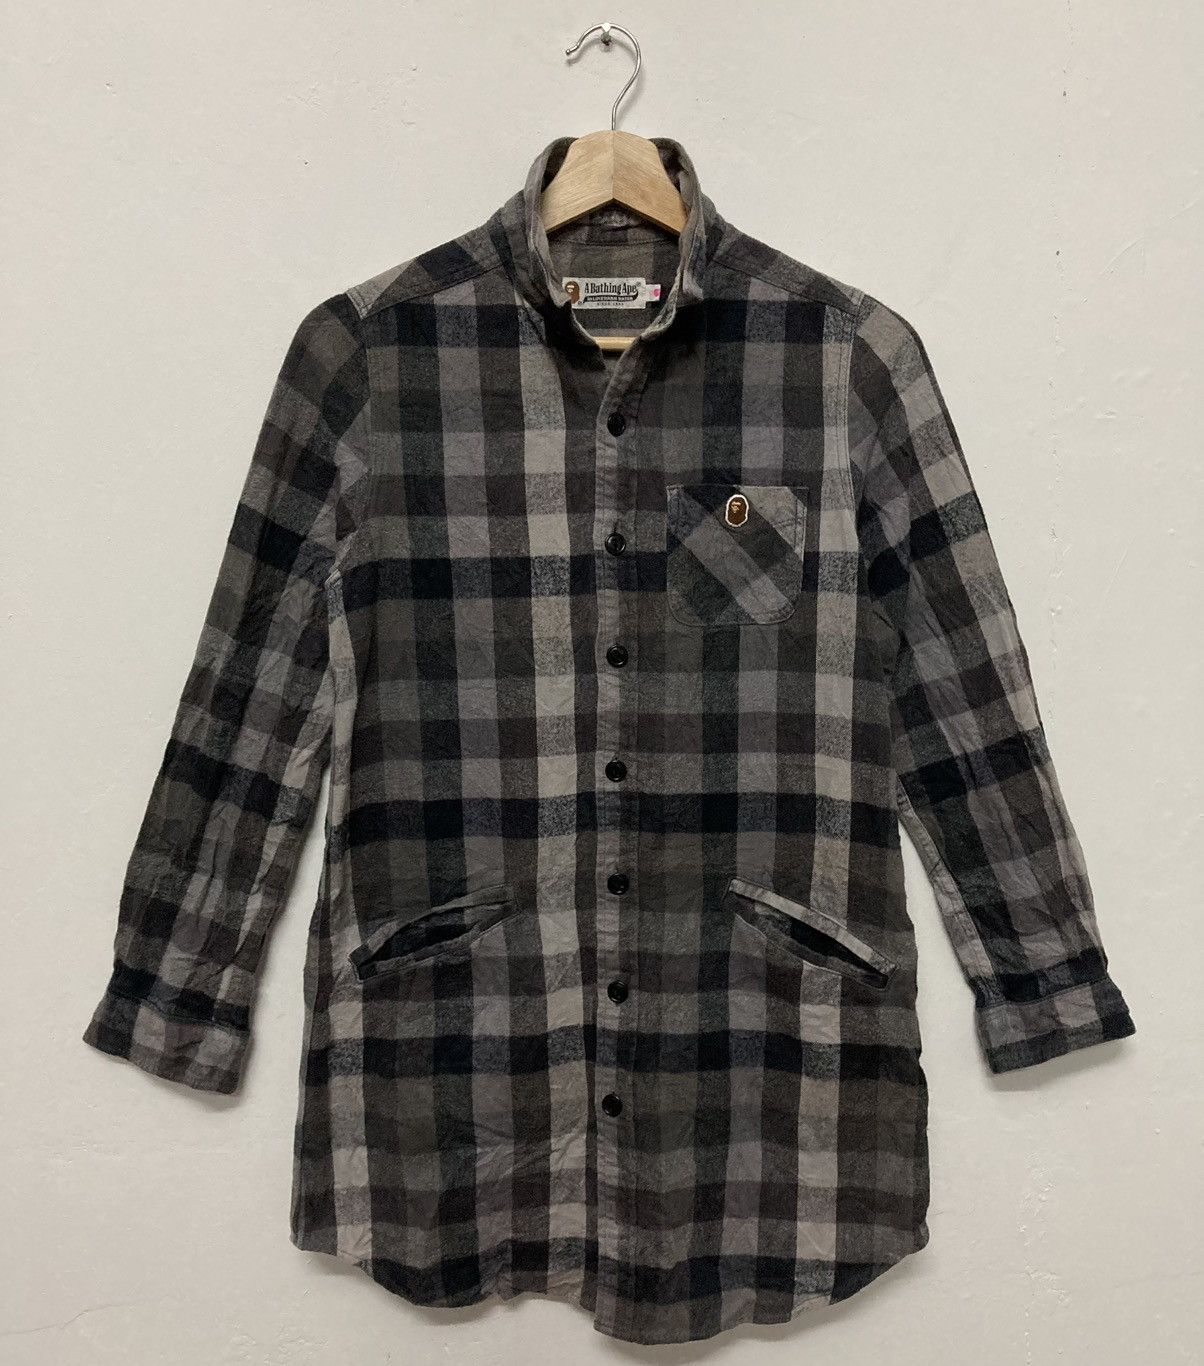 Bape Button Up Checker Flannel Shirt Made in Japan - 1